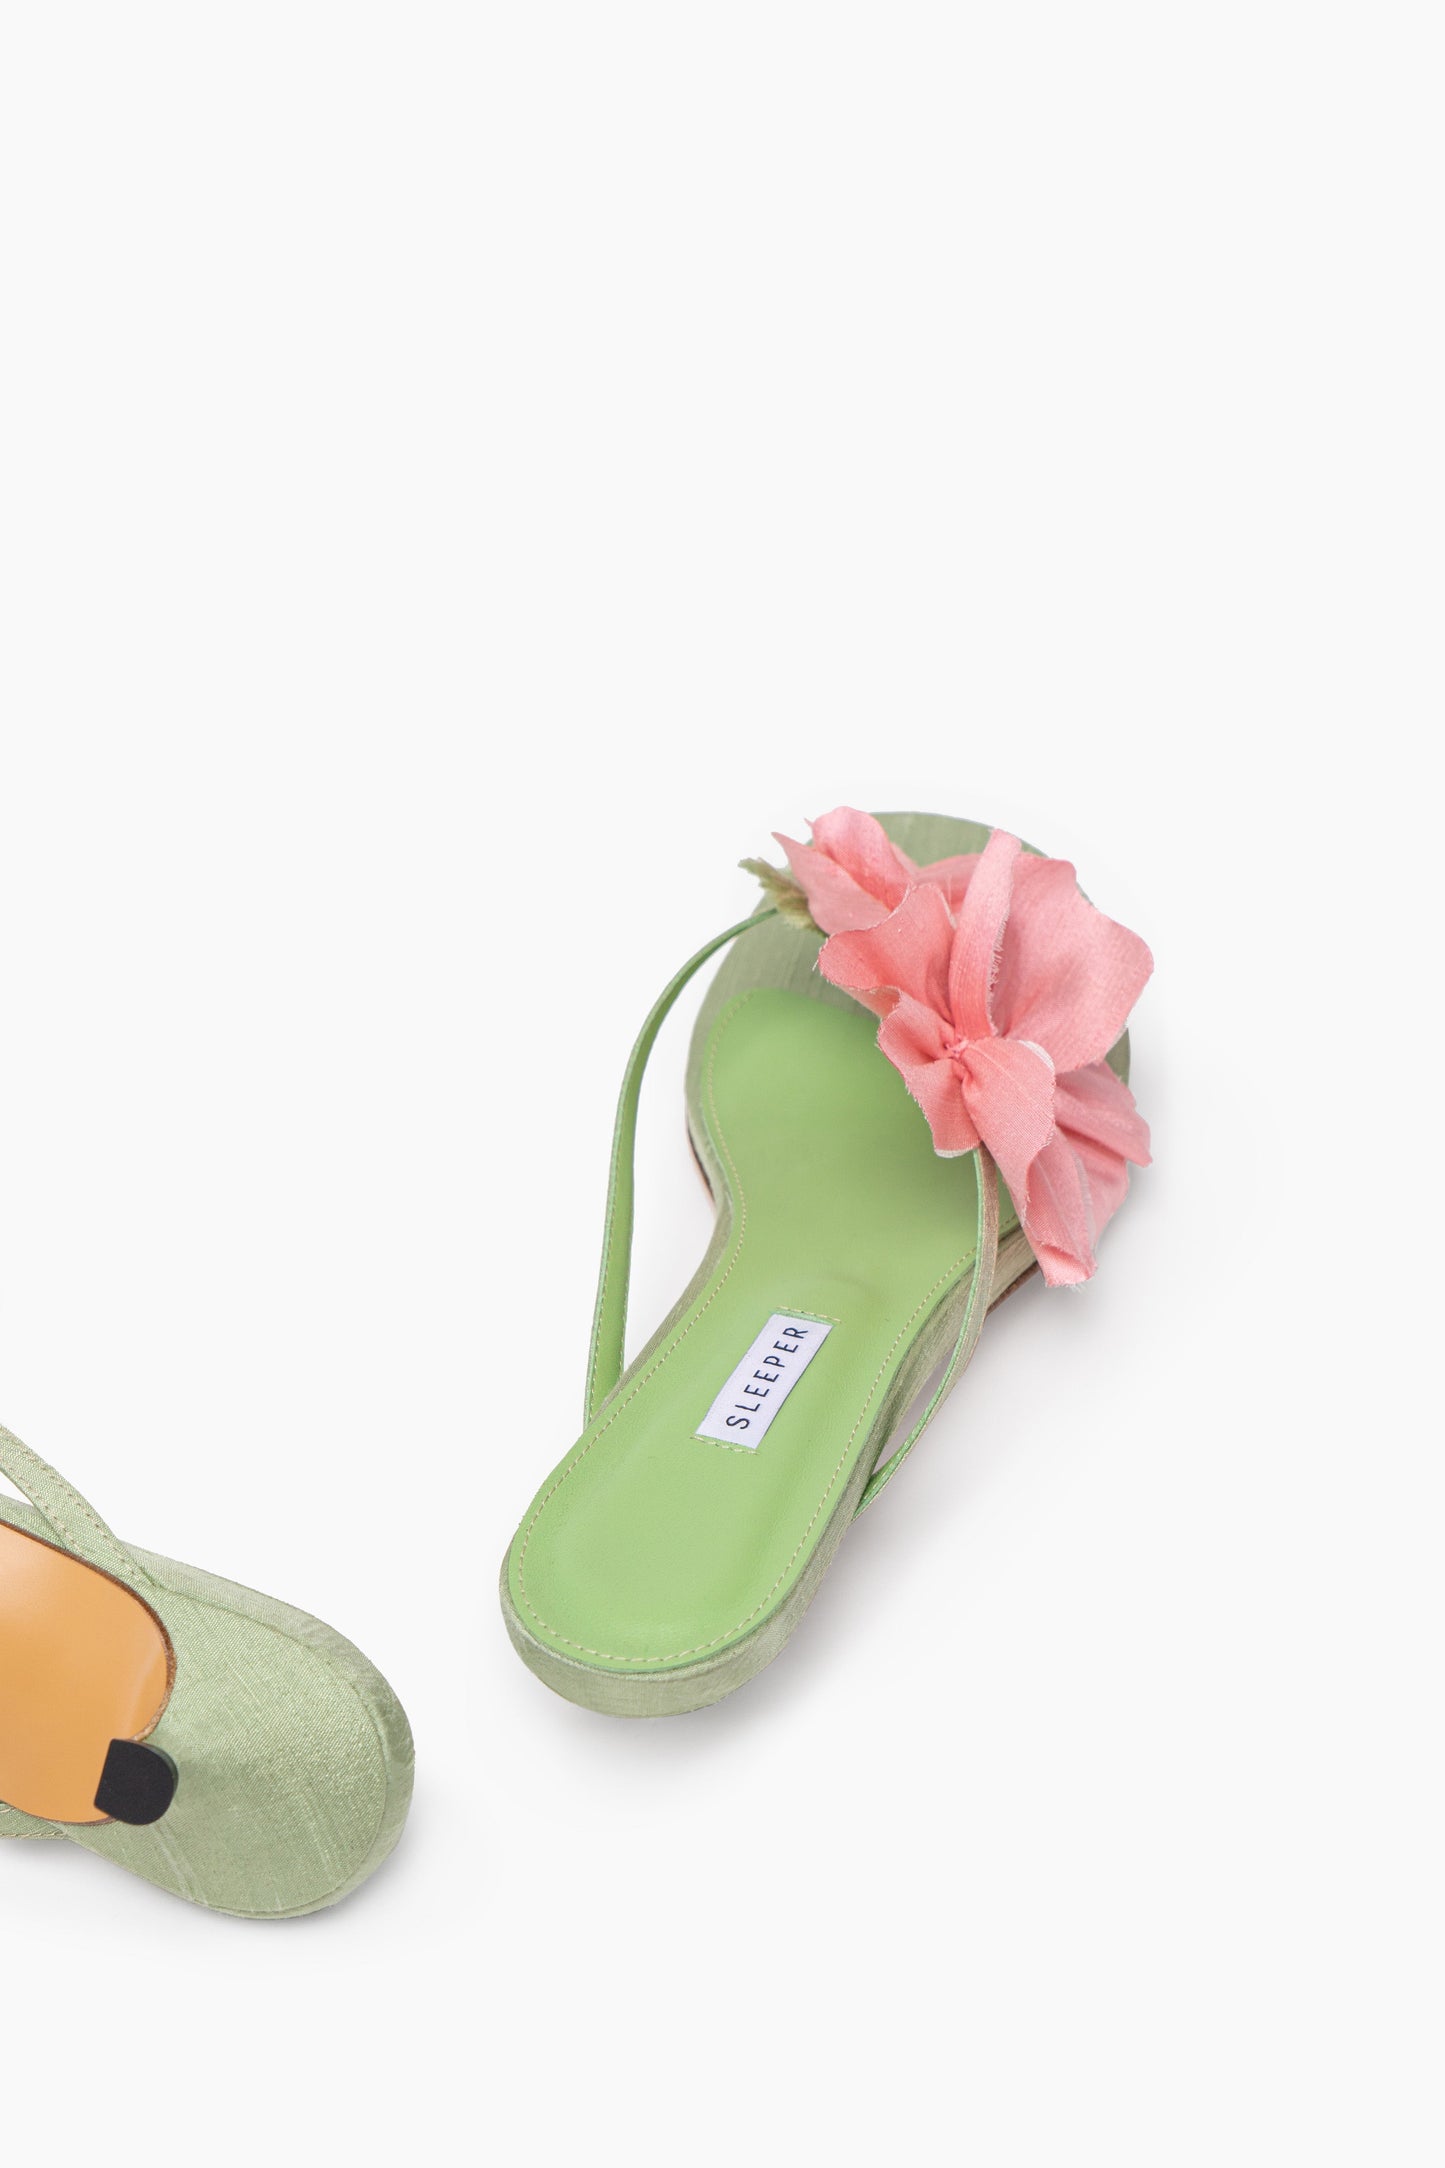 Poppies Silk Kitten Heel Mules in Mint and Pink